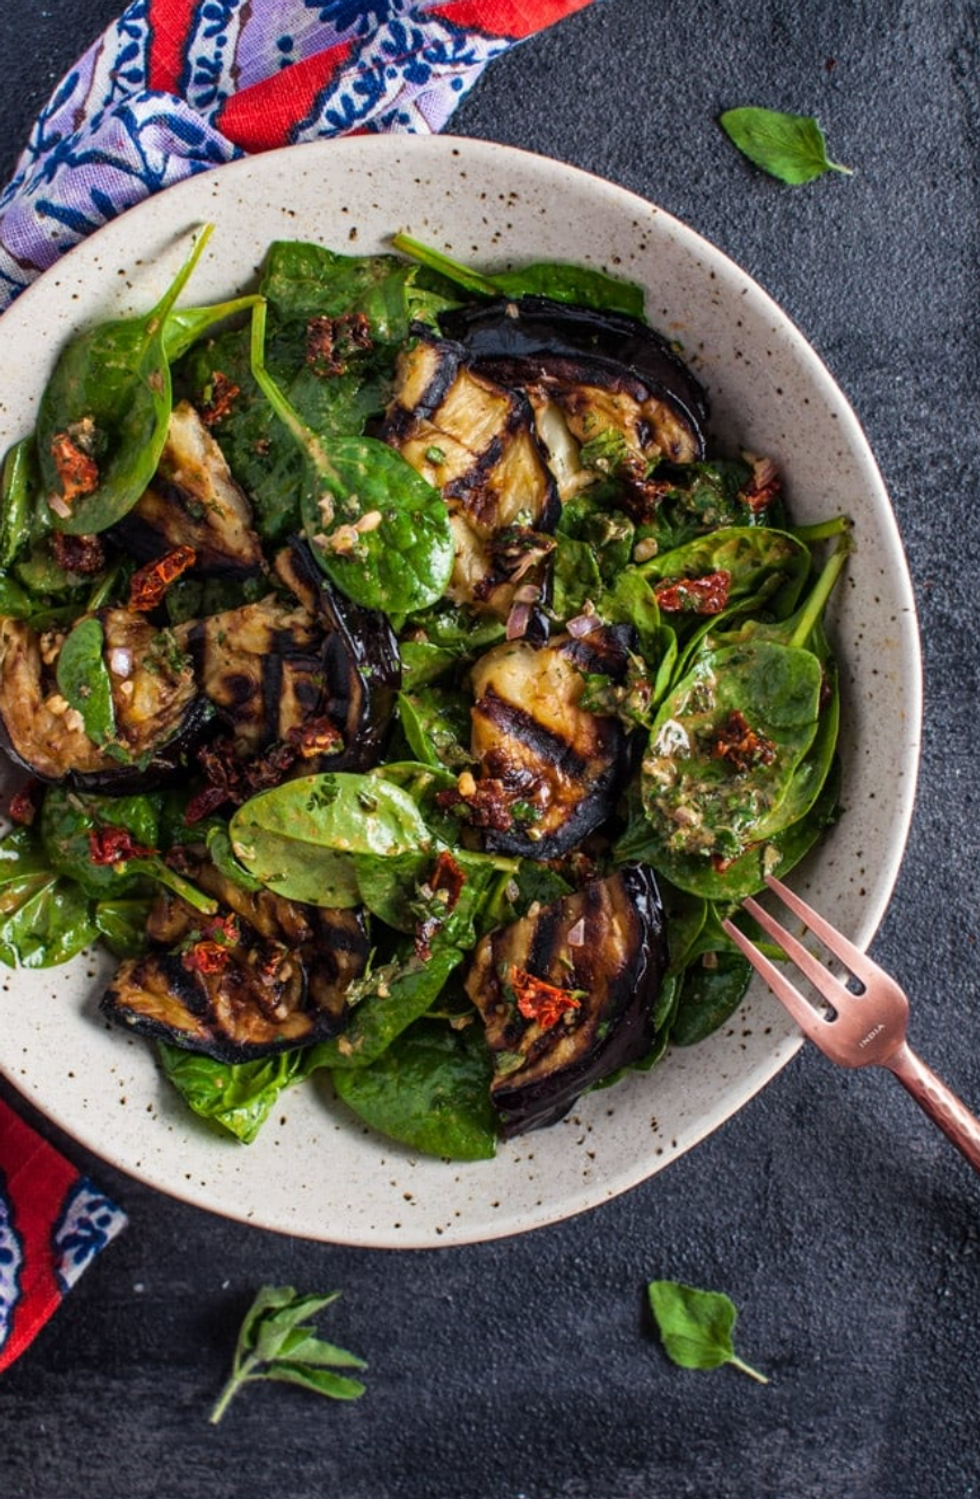 Grilled Eggplant and Spinach Salad